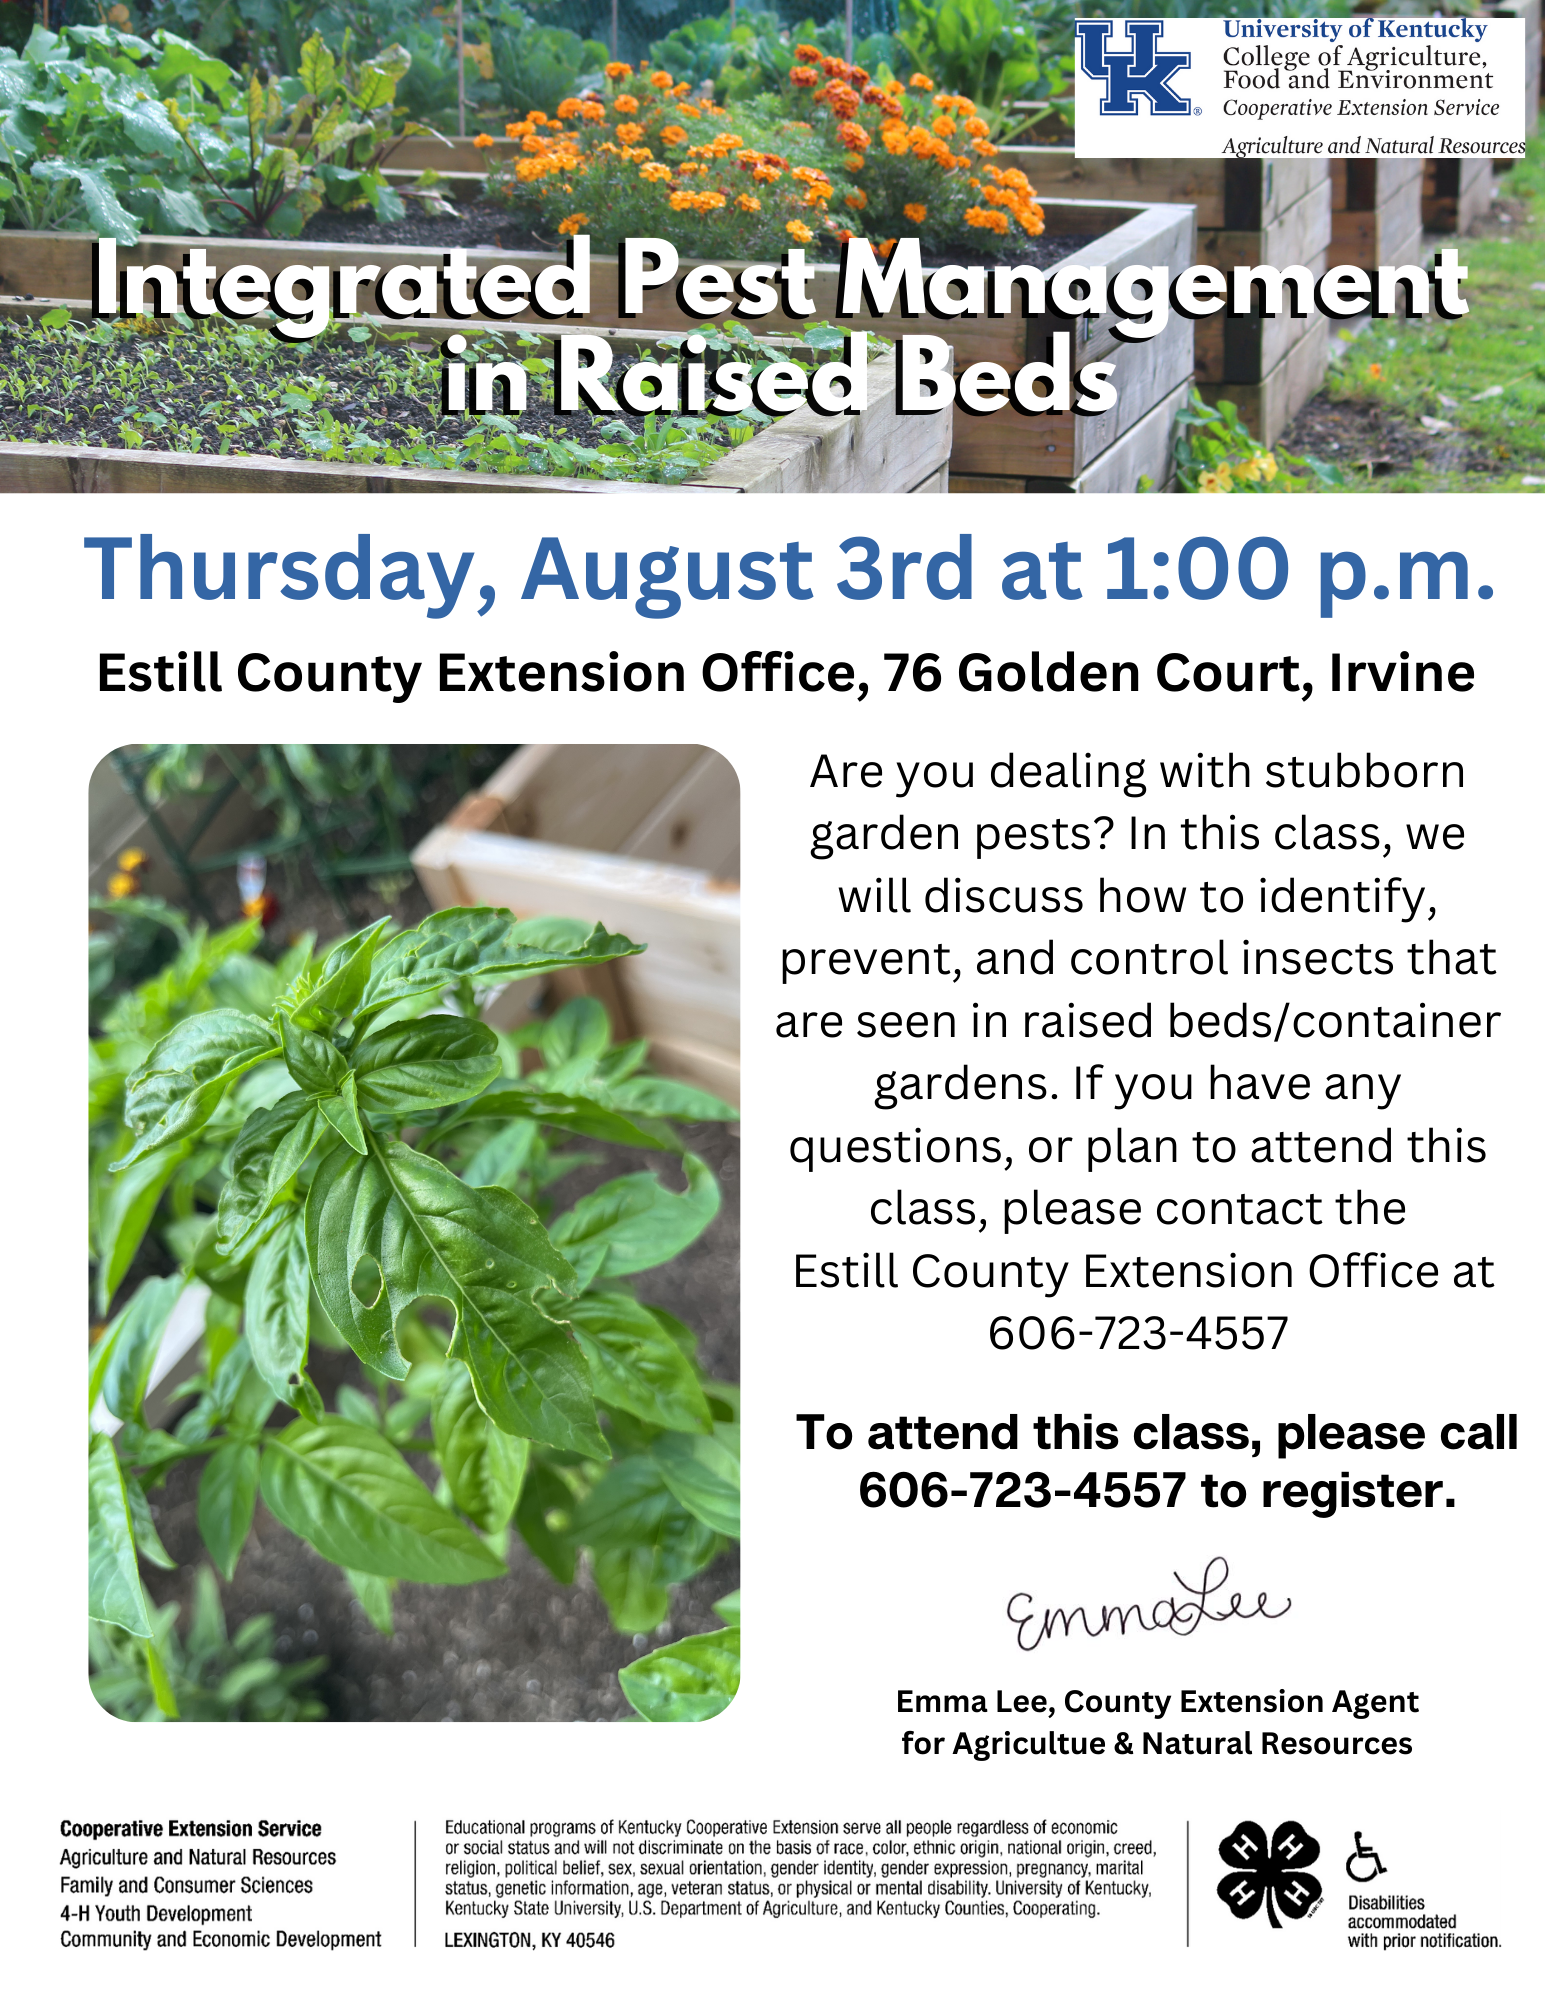 Integrated Pest Management in Raised Beds upcoming meeting on August 3 at 1 p.m.